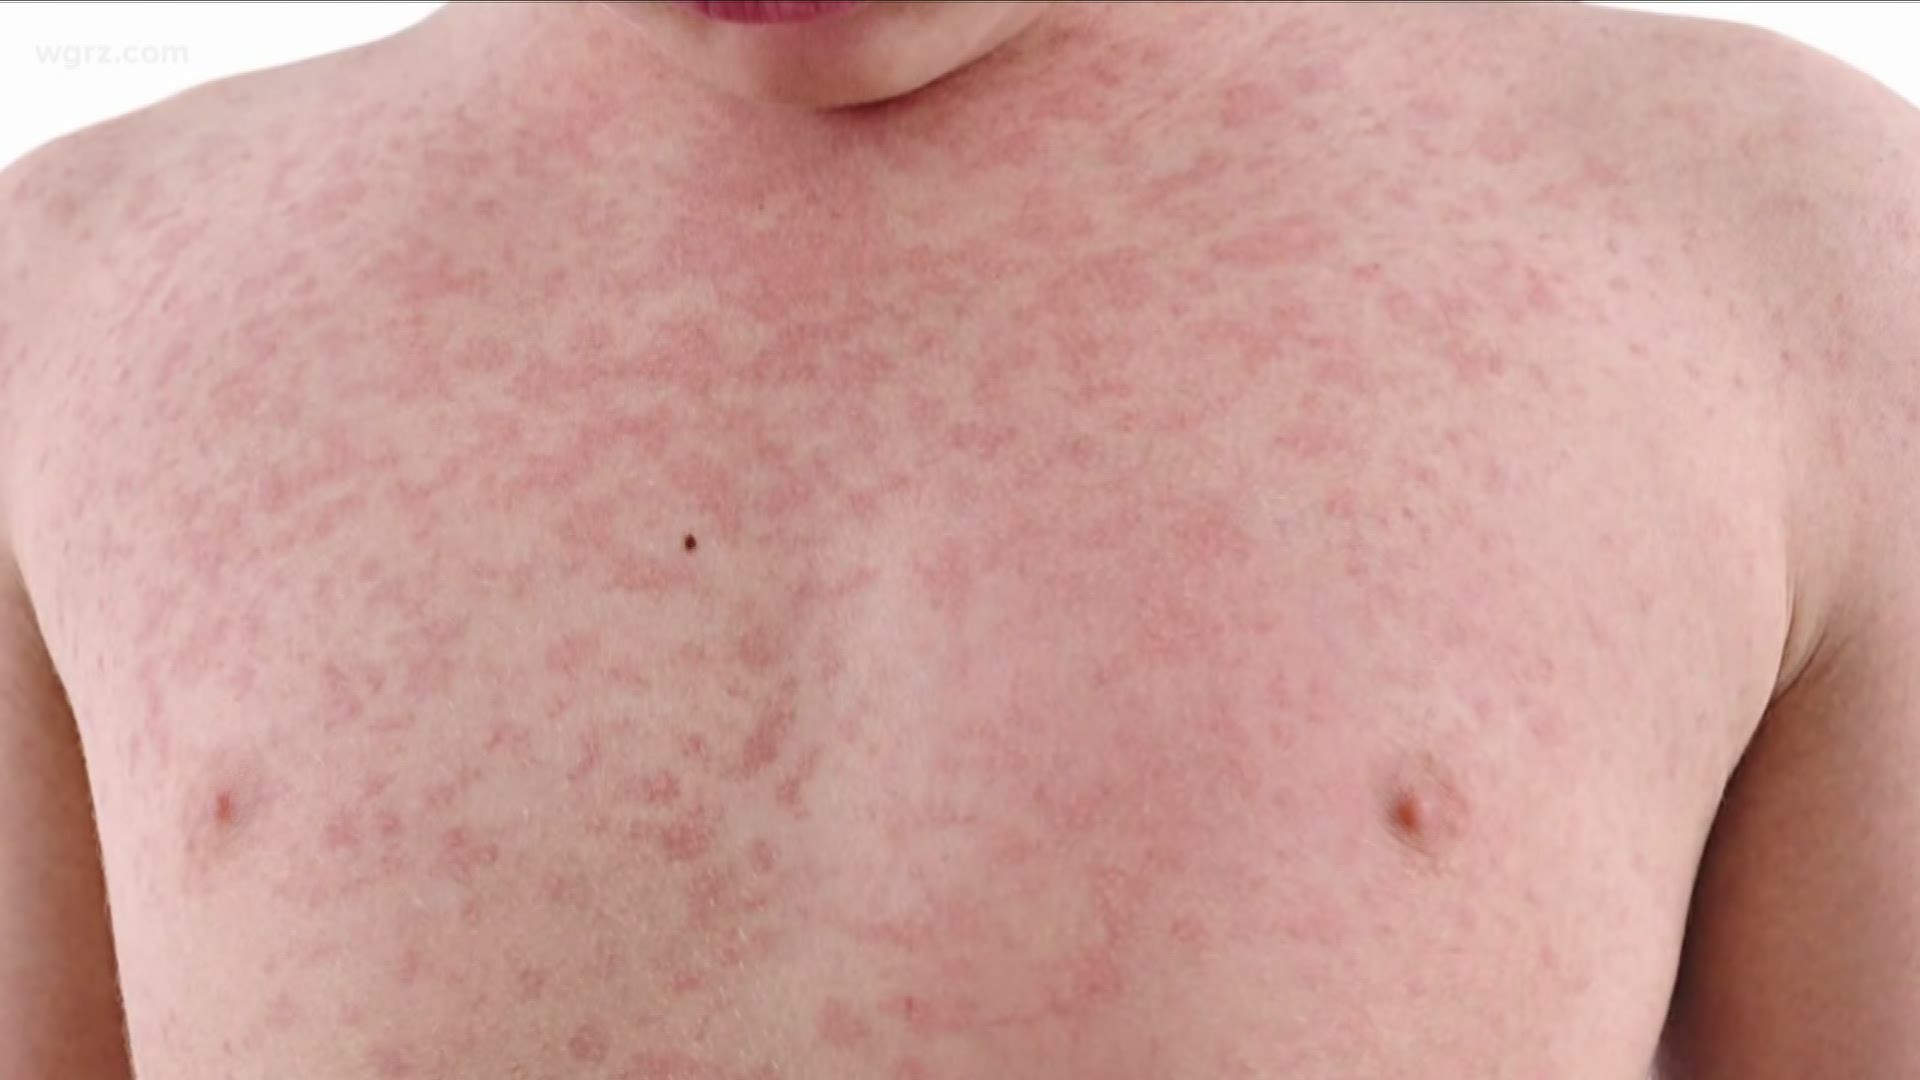 There have been more than 900 cases of measles in the state this year...